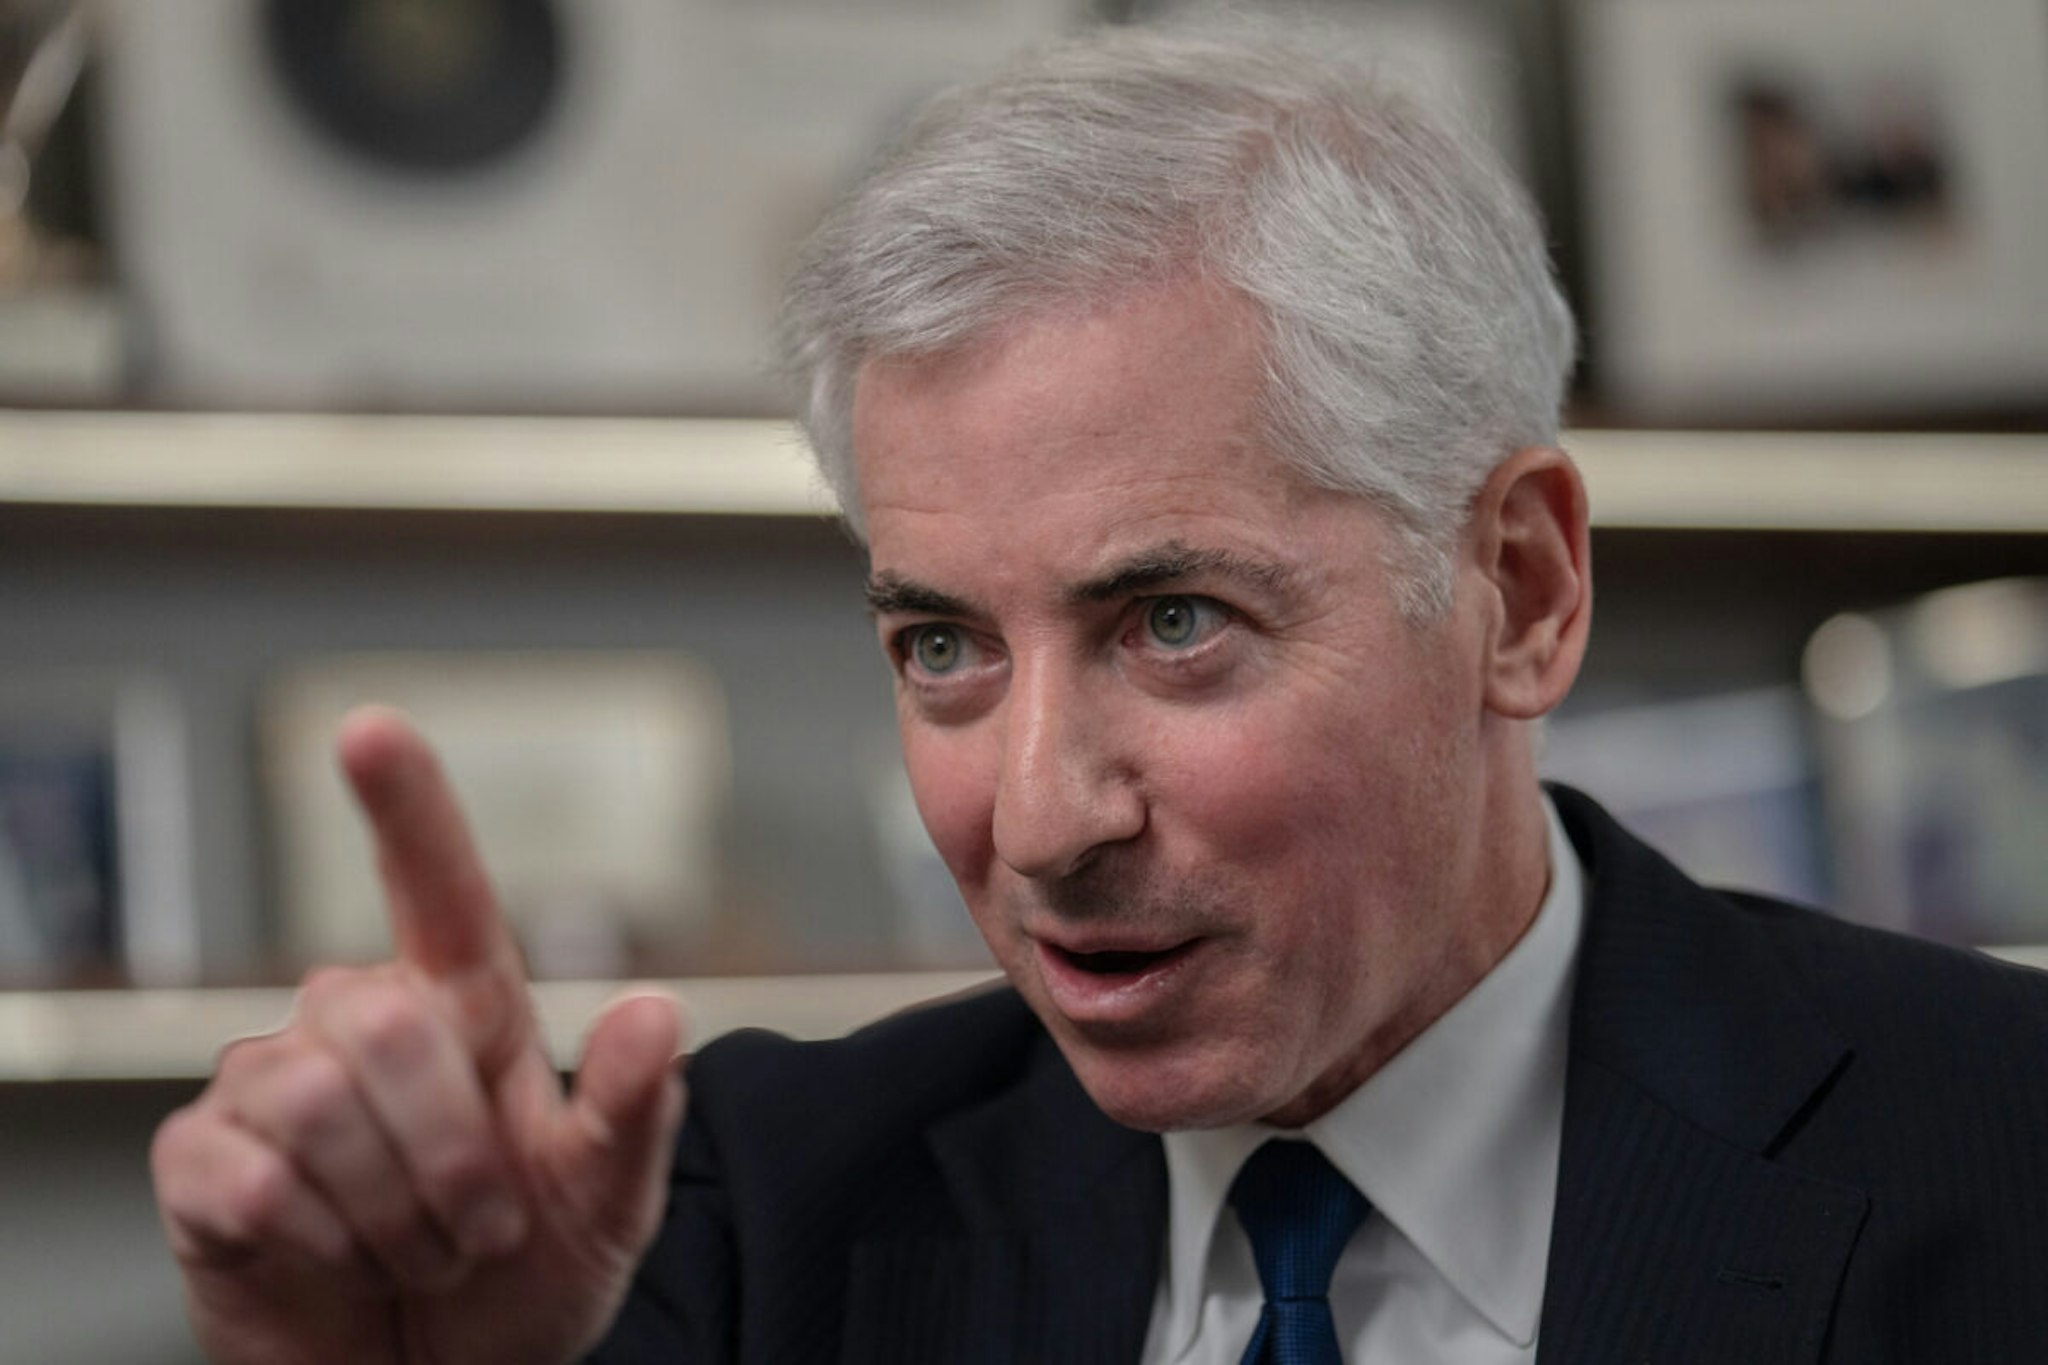 Bill Ackman, chief executive officer of Pershing Square Capital Management LP, speaks during an interview for an episode of "The David Rubenstein Show: Peer-to-Peer Conversations" in New York, US, on Tuesday, Nov. 28, 2023.